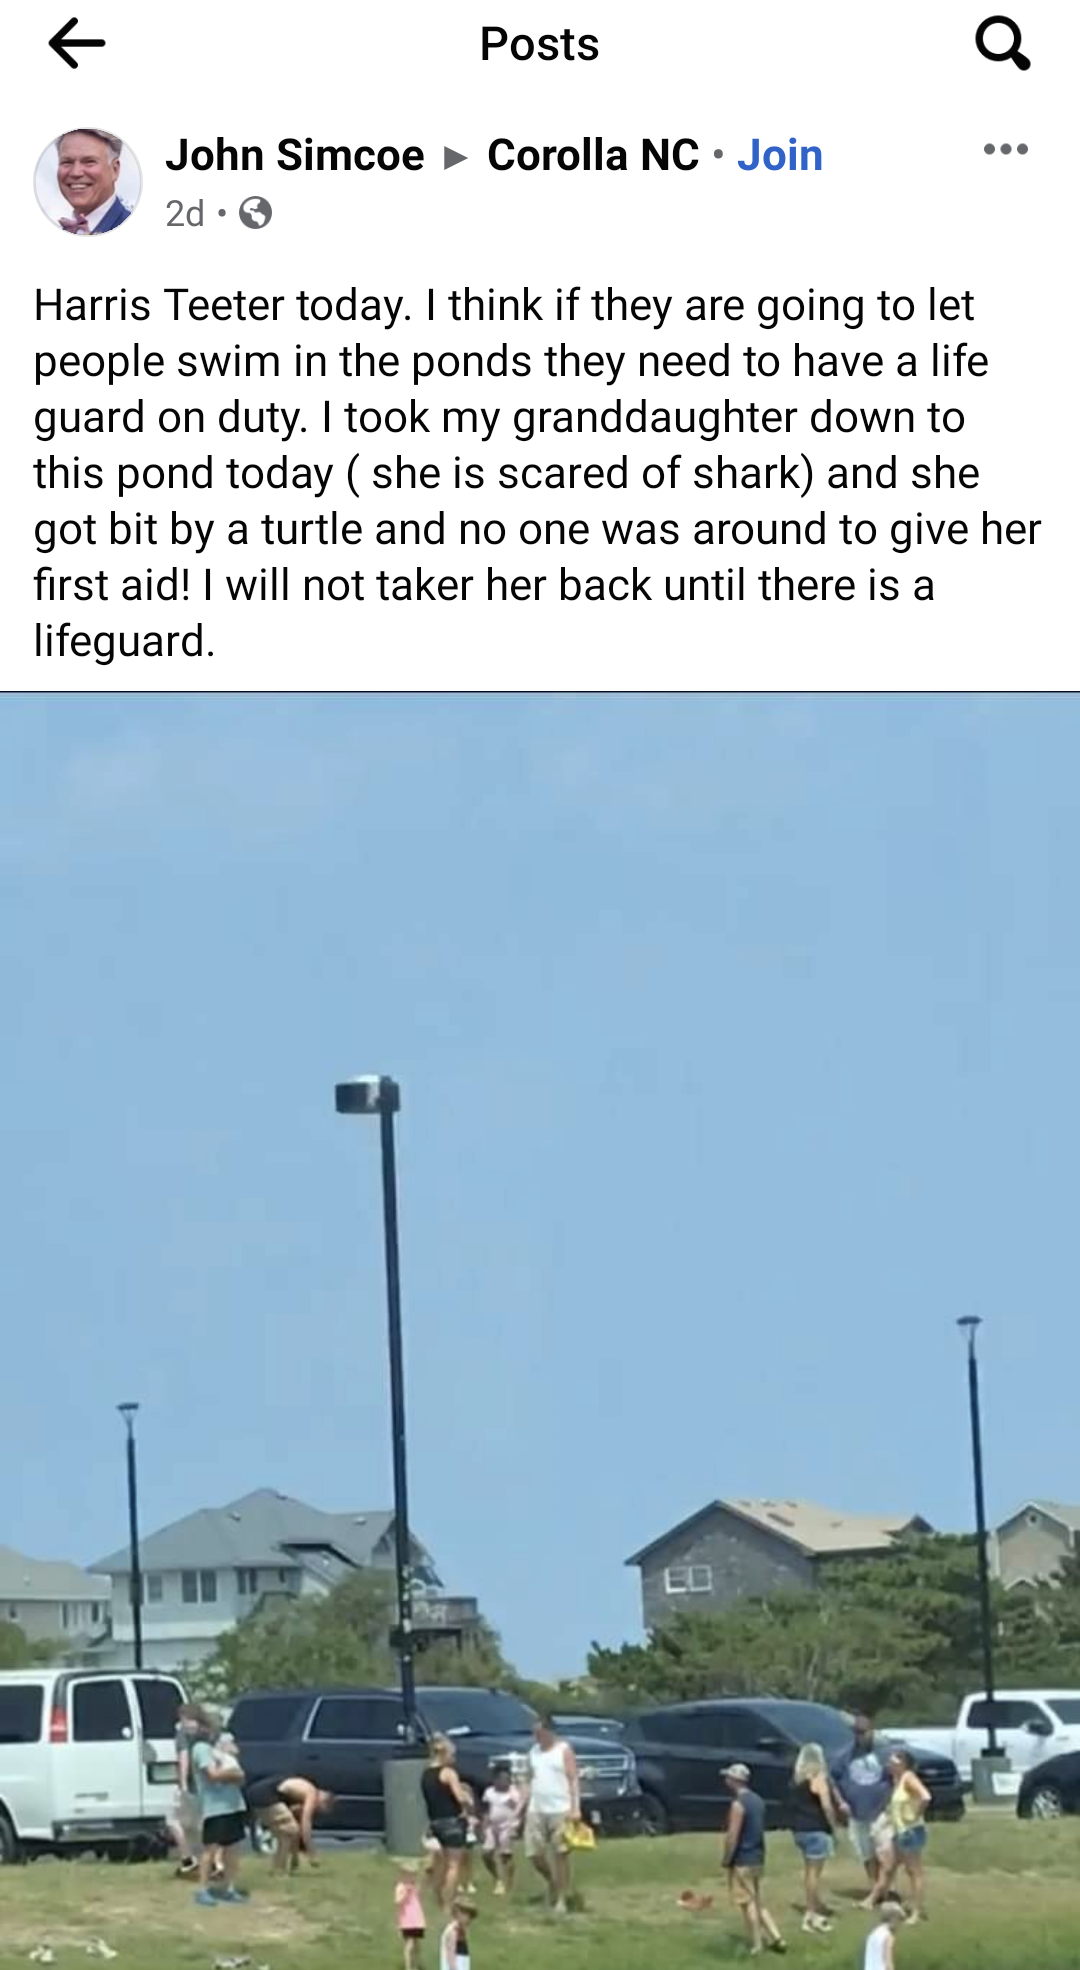 facebook post complaining that there was no a lifeguard at a lake so the man let his granddaughter swim and she was bit by a turtle